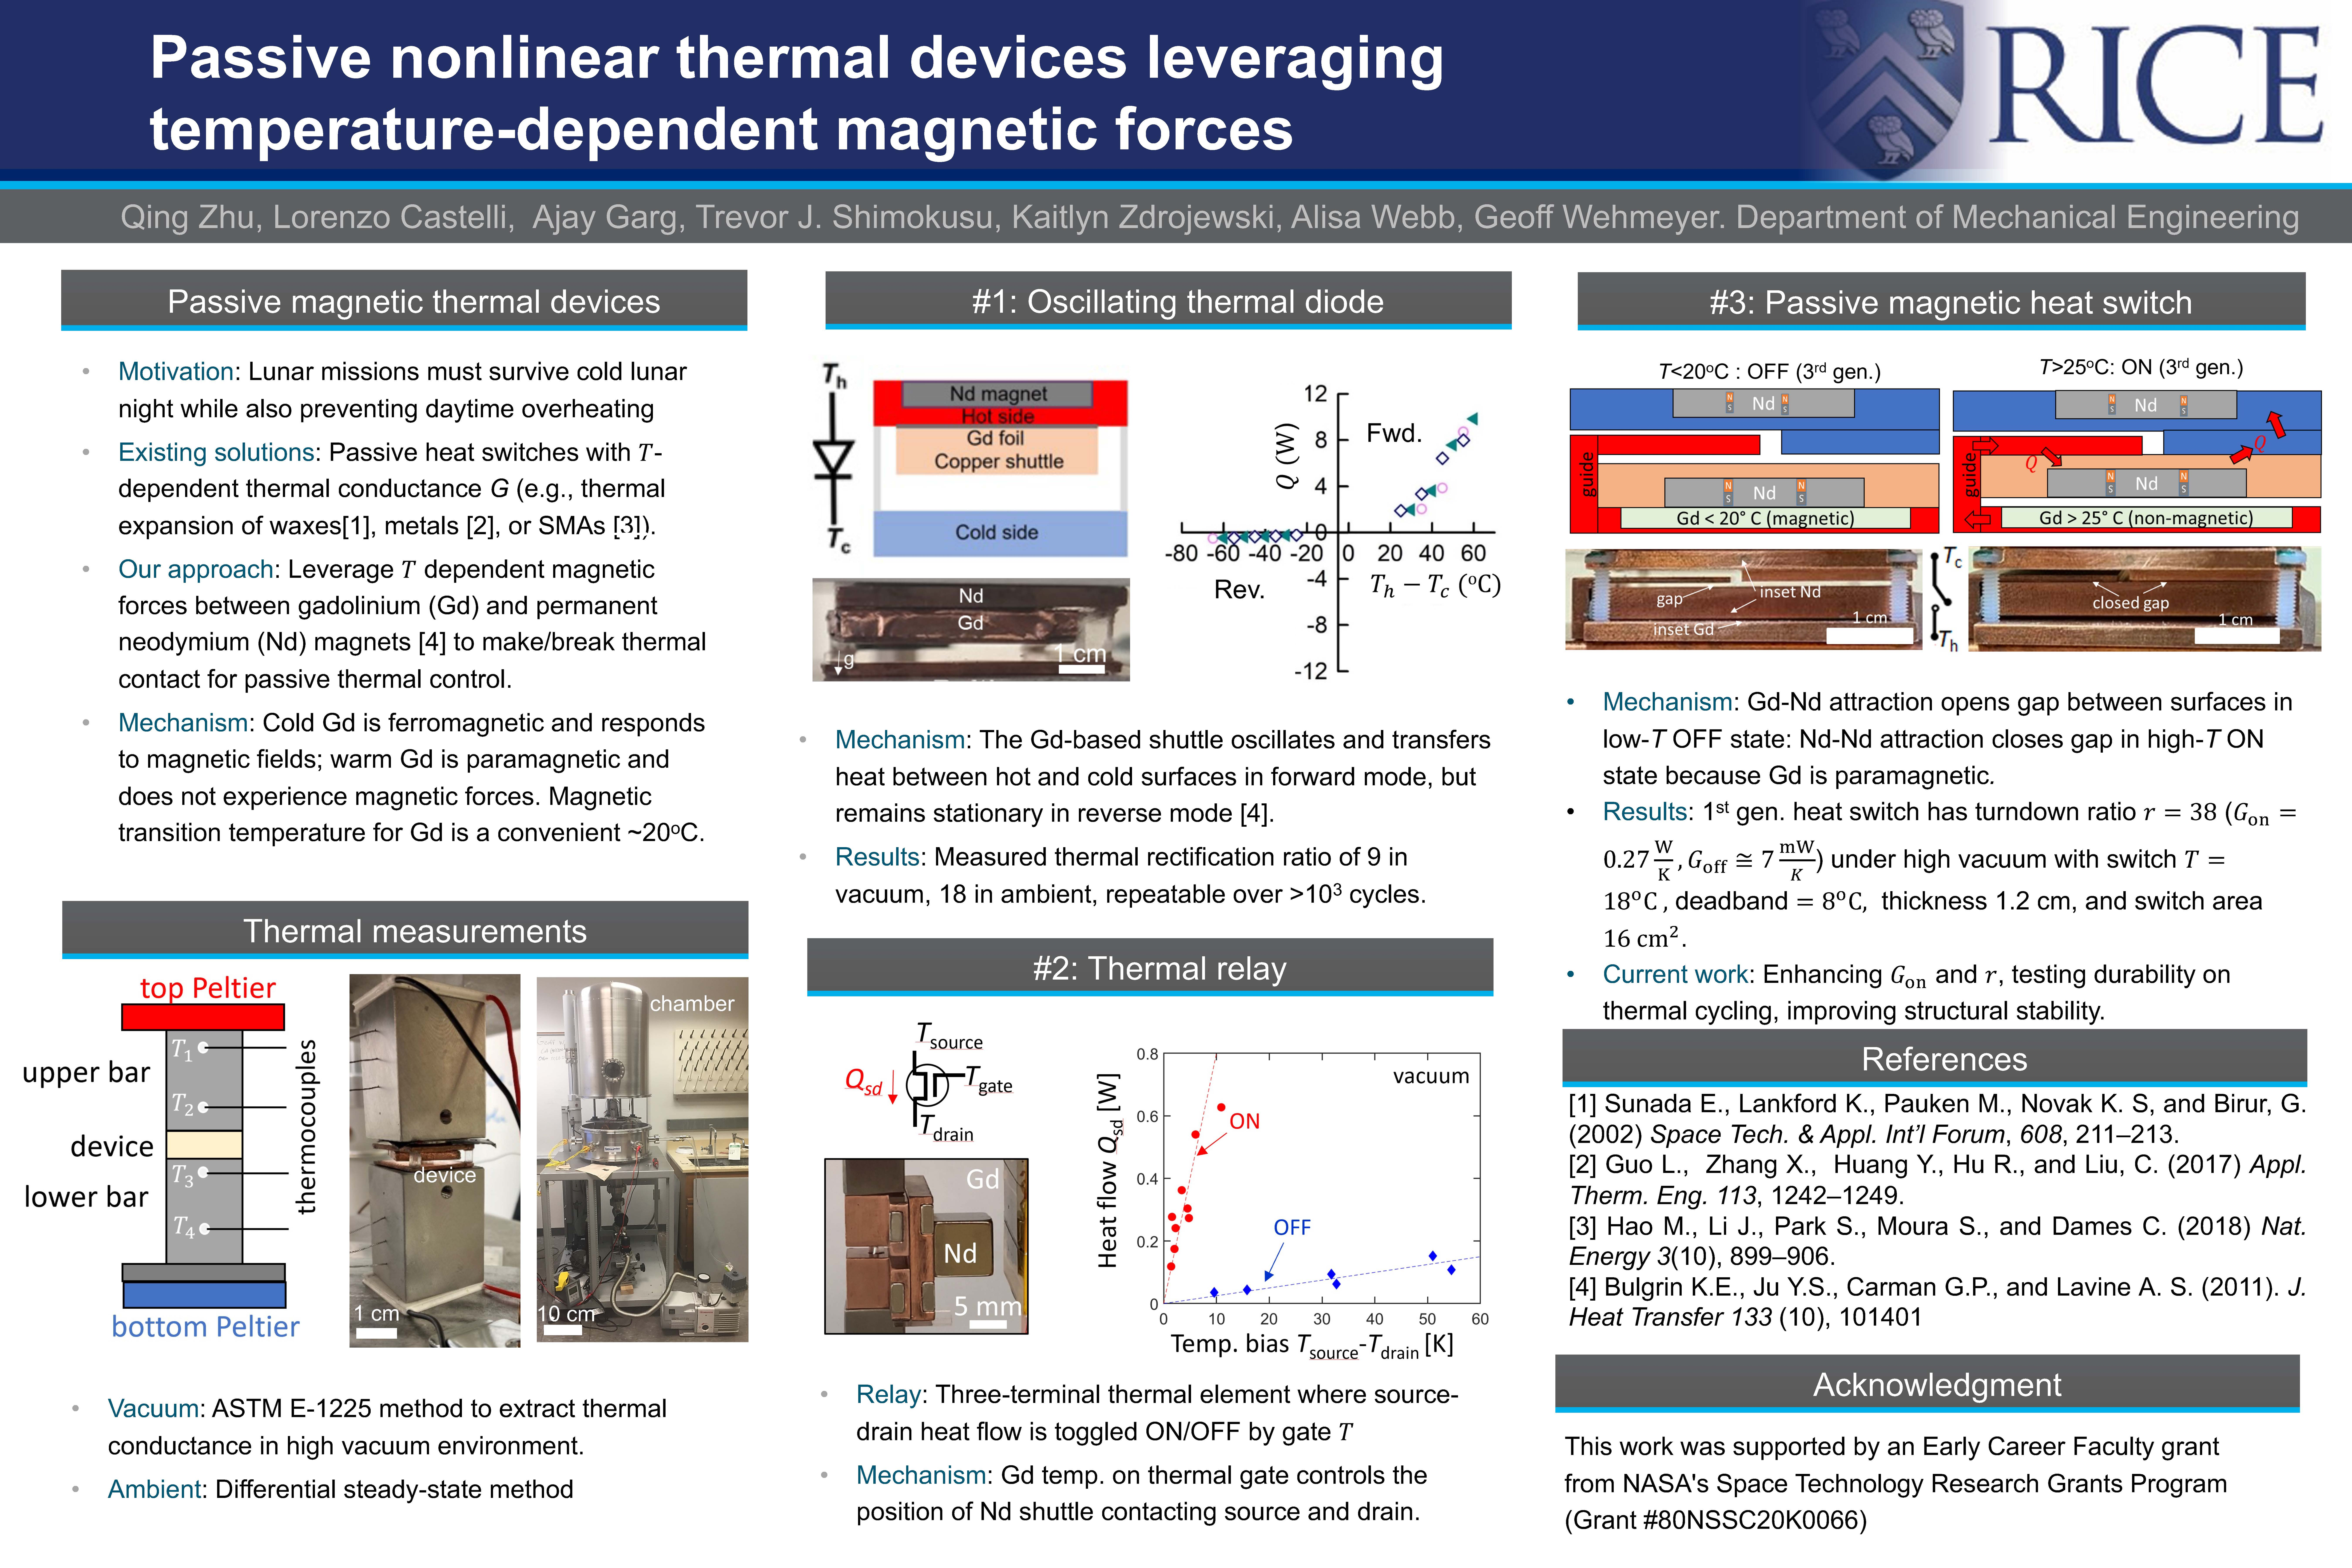 Passive nonlinear thermal devices leveraging temperature-dependent magnetic forces